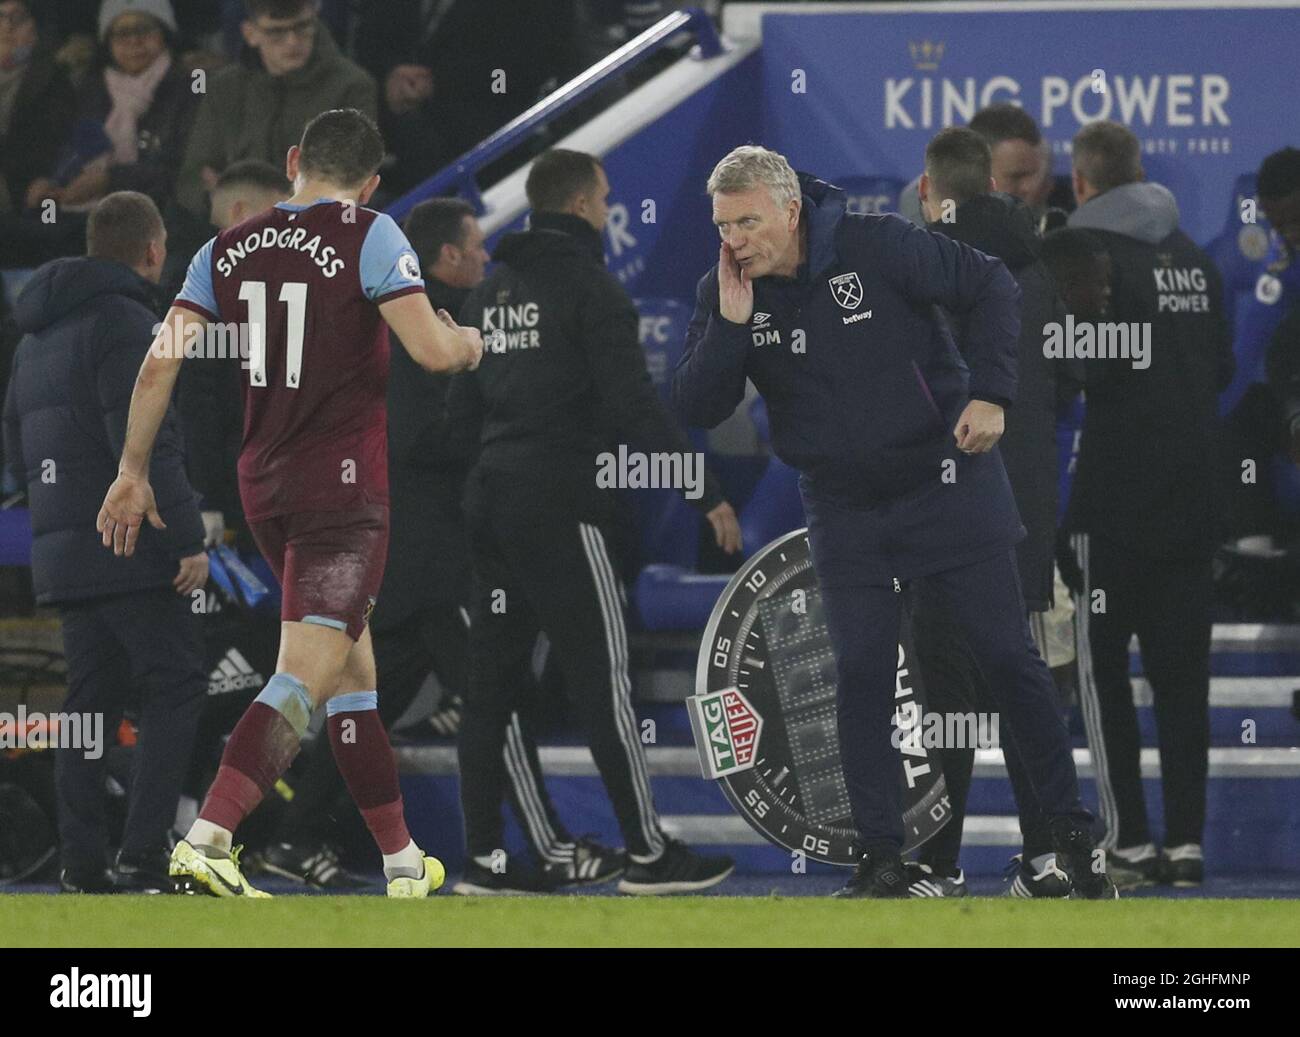 David Moyes manager of West Ham United issues instructions to Robert Snodgrass of West Ham United during the Premier League match at the King Power Stadium, Leicester. Picture date: 22nd January 2020. Picture credit should read: Darren Staples/Sportimage via PA Images Stock Photo